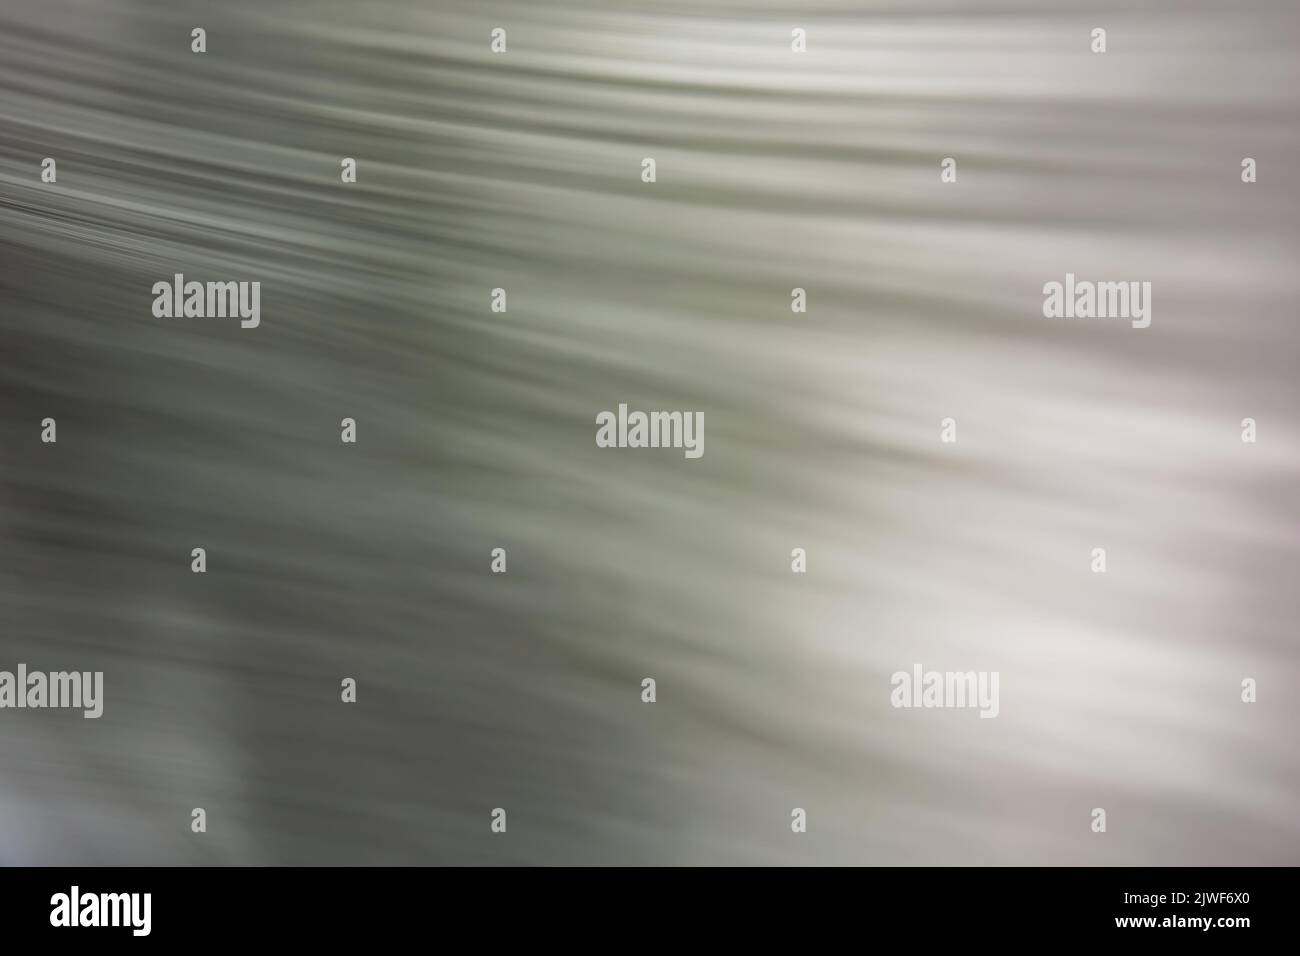 Abstract gray-green striped background, gradient and ripples. Backdrop Stock Photo